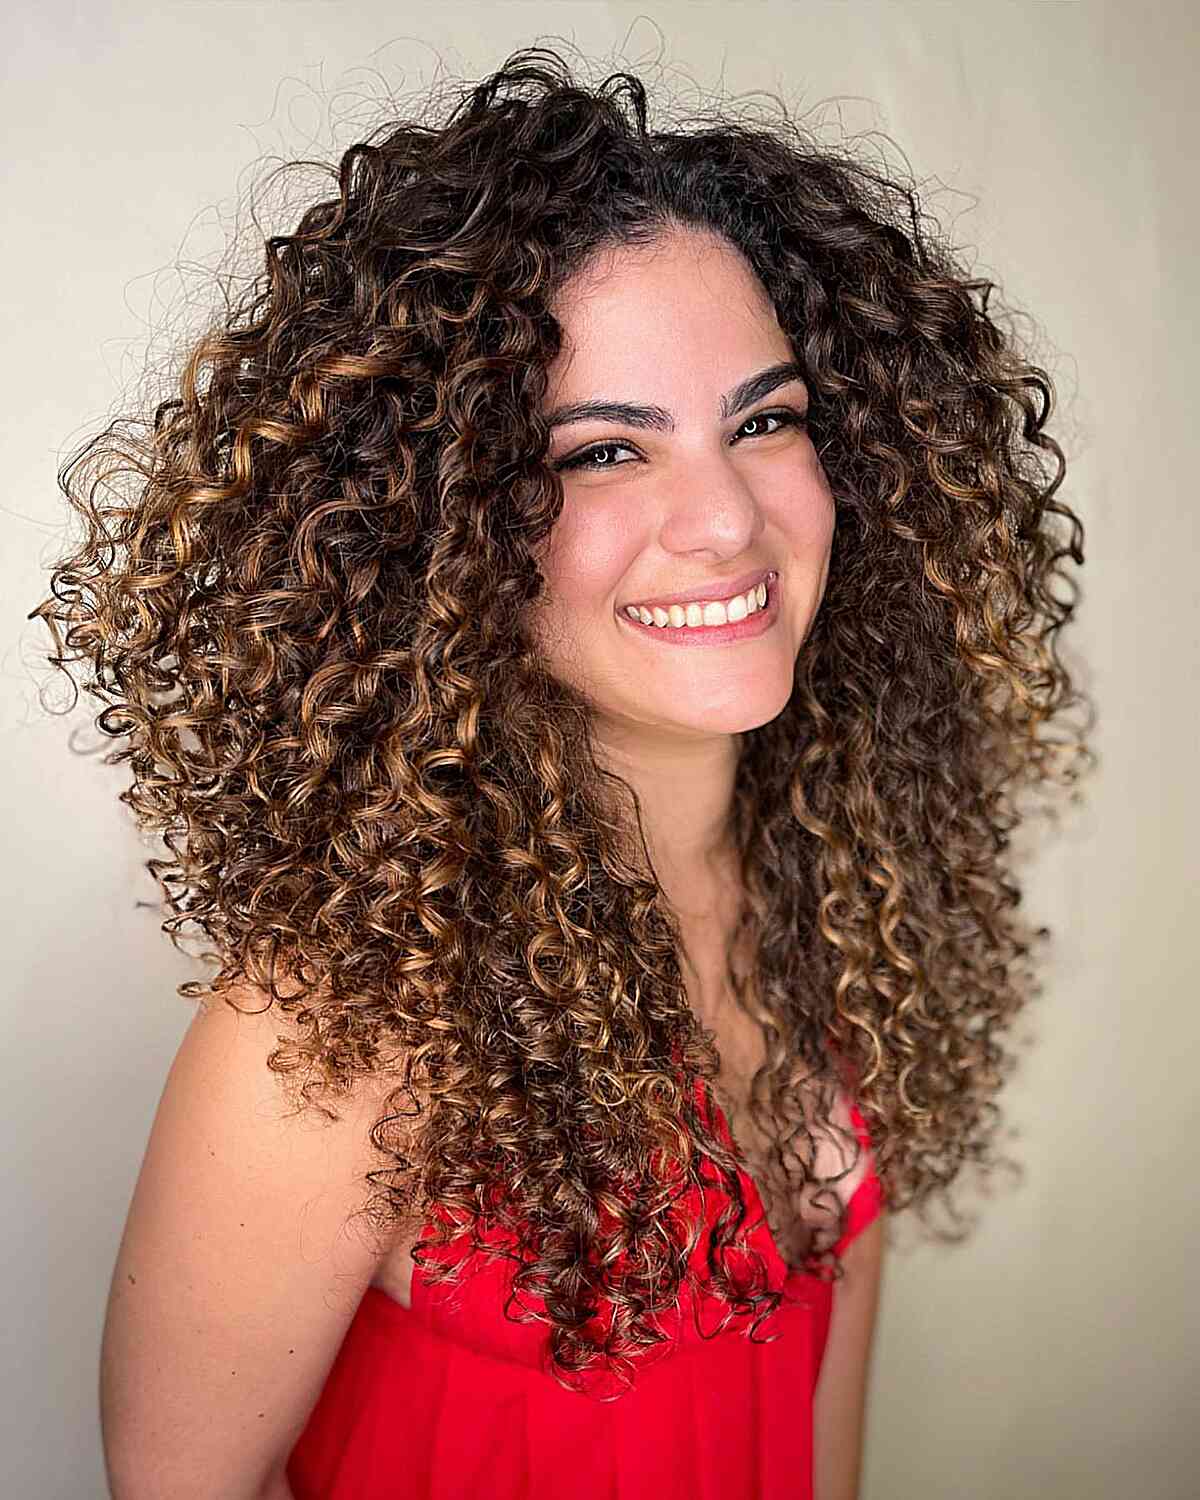 A woman with a Cadō cut featuring voluminous hair and layered curls, giving a lively and youthful appearance.